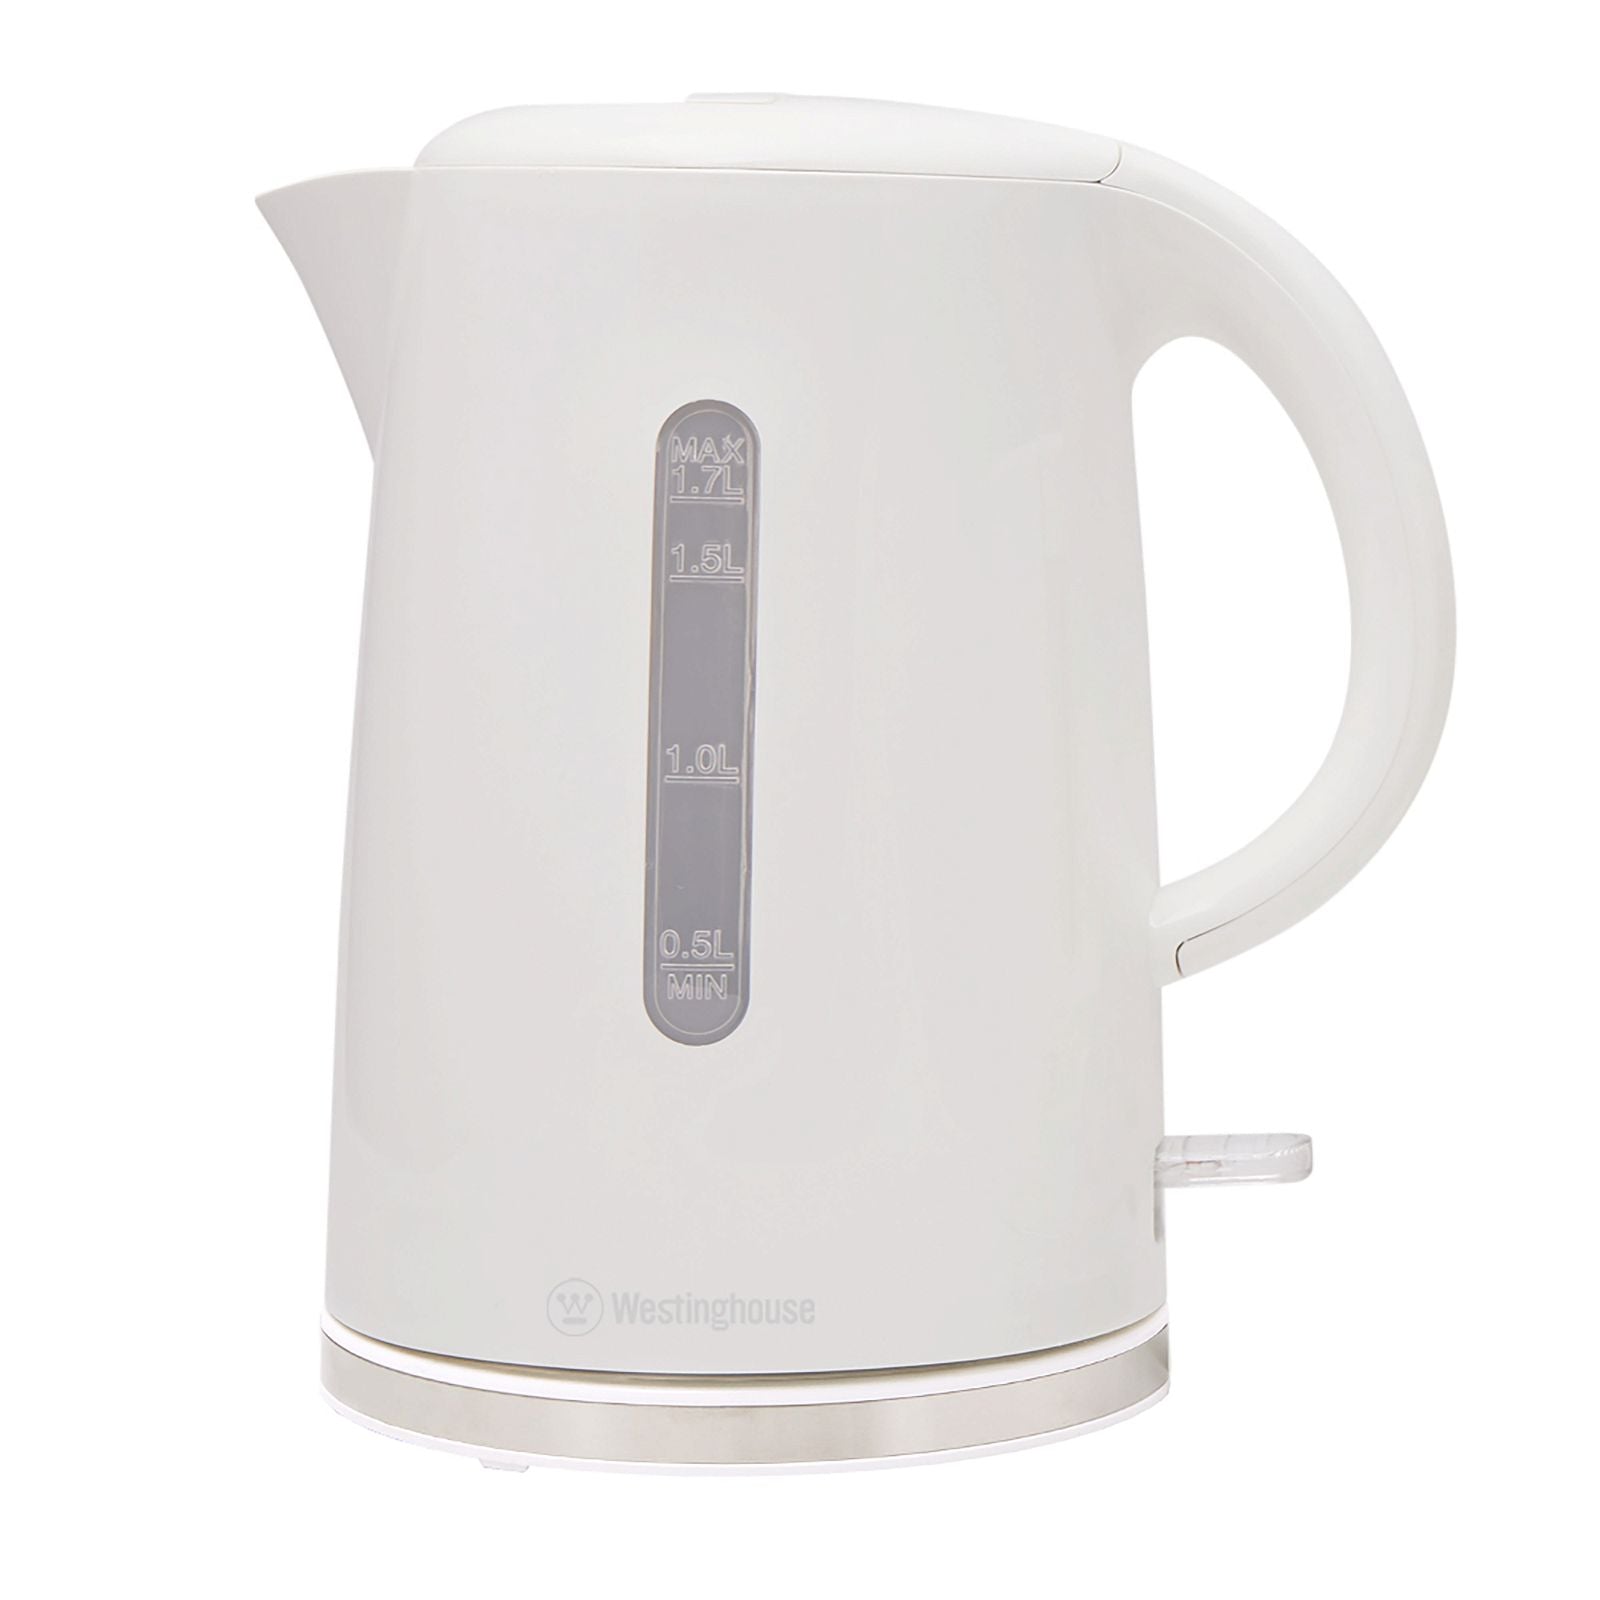 Westinghouse Kettle 1.7L White-#product_category#- Distributed by:  under license